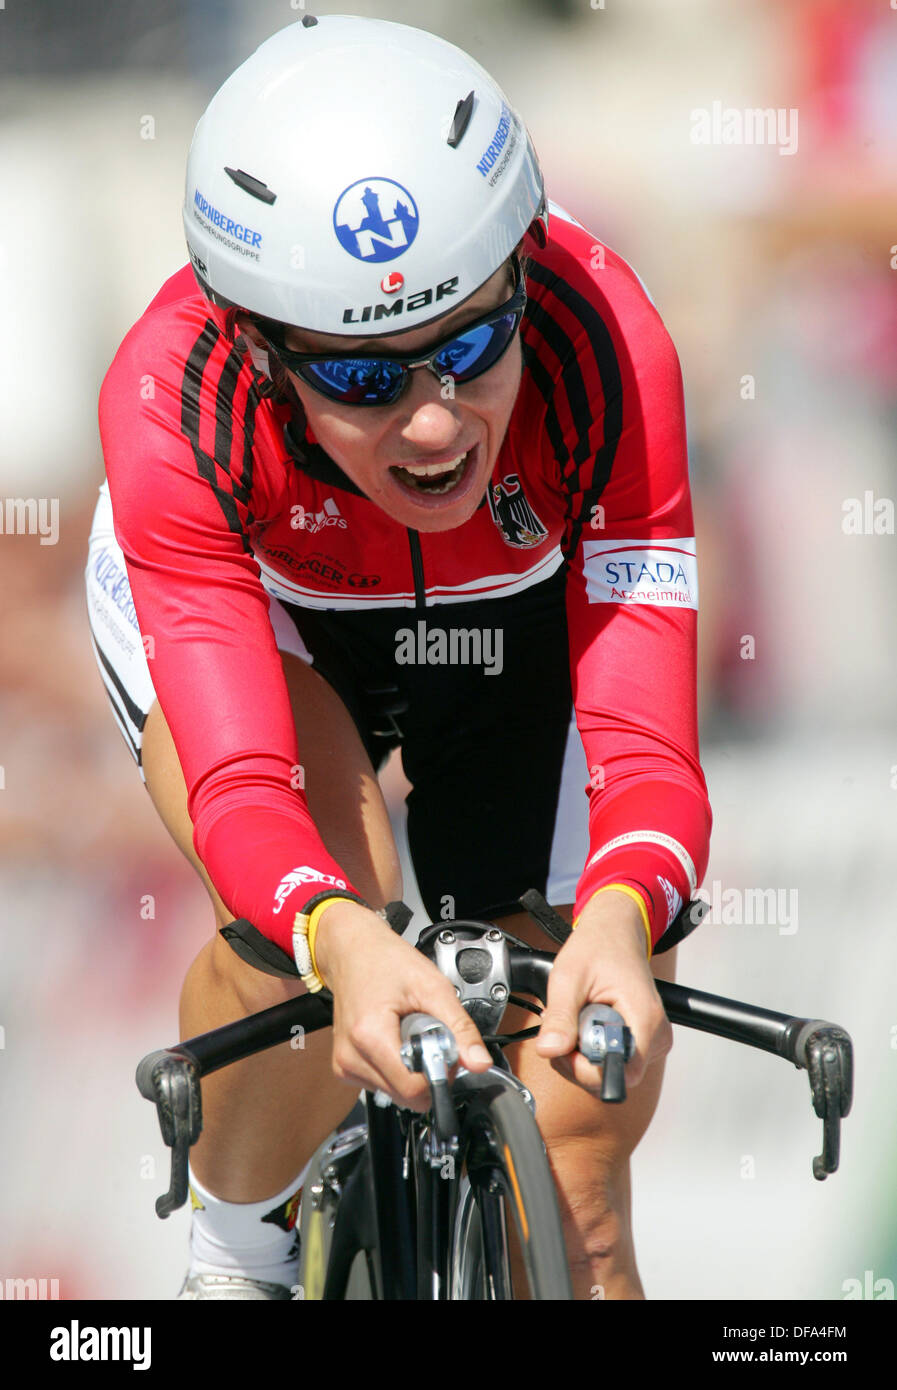 German cyclist Trixi Worrack is pictured during the World Cycling Championships 2006 women's elite time-trial in Salzburg, Austria, Wednesday, 20 September 2006. Worrack finished the 26.12km route in ninth position and missed a medal. Photo: Gero Breloer Stock Photo